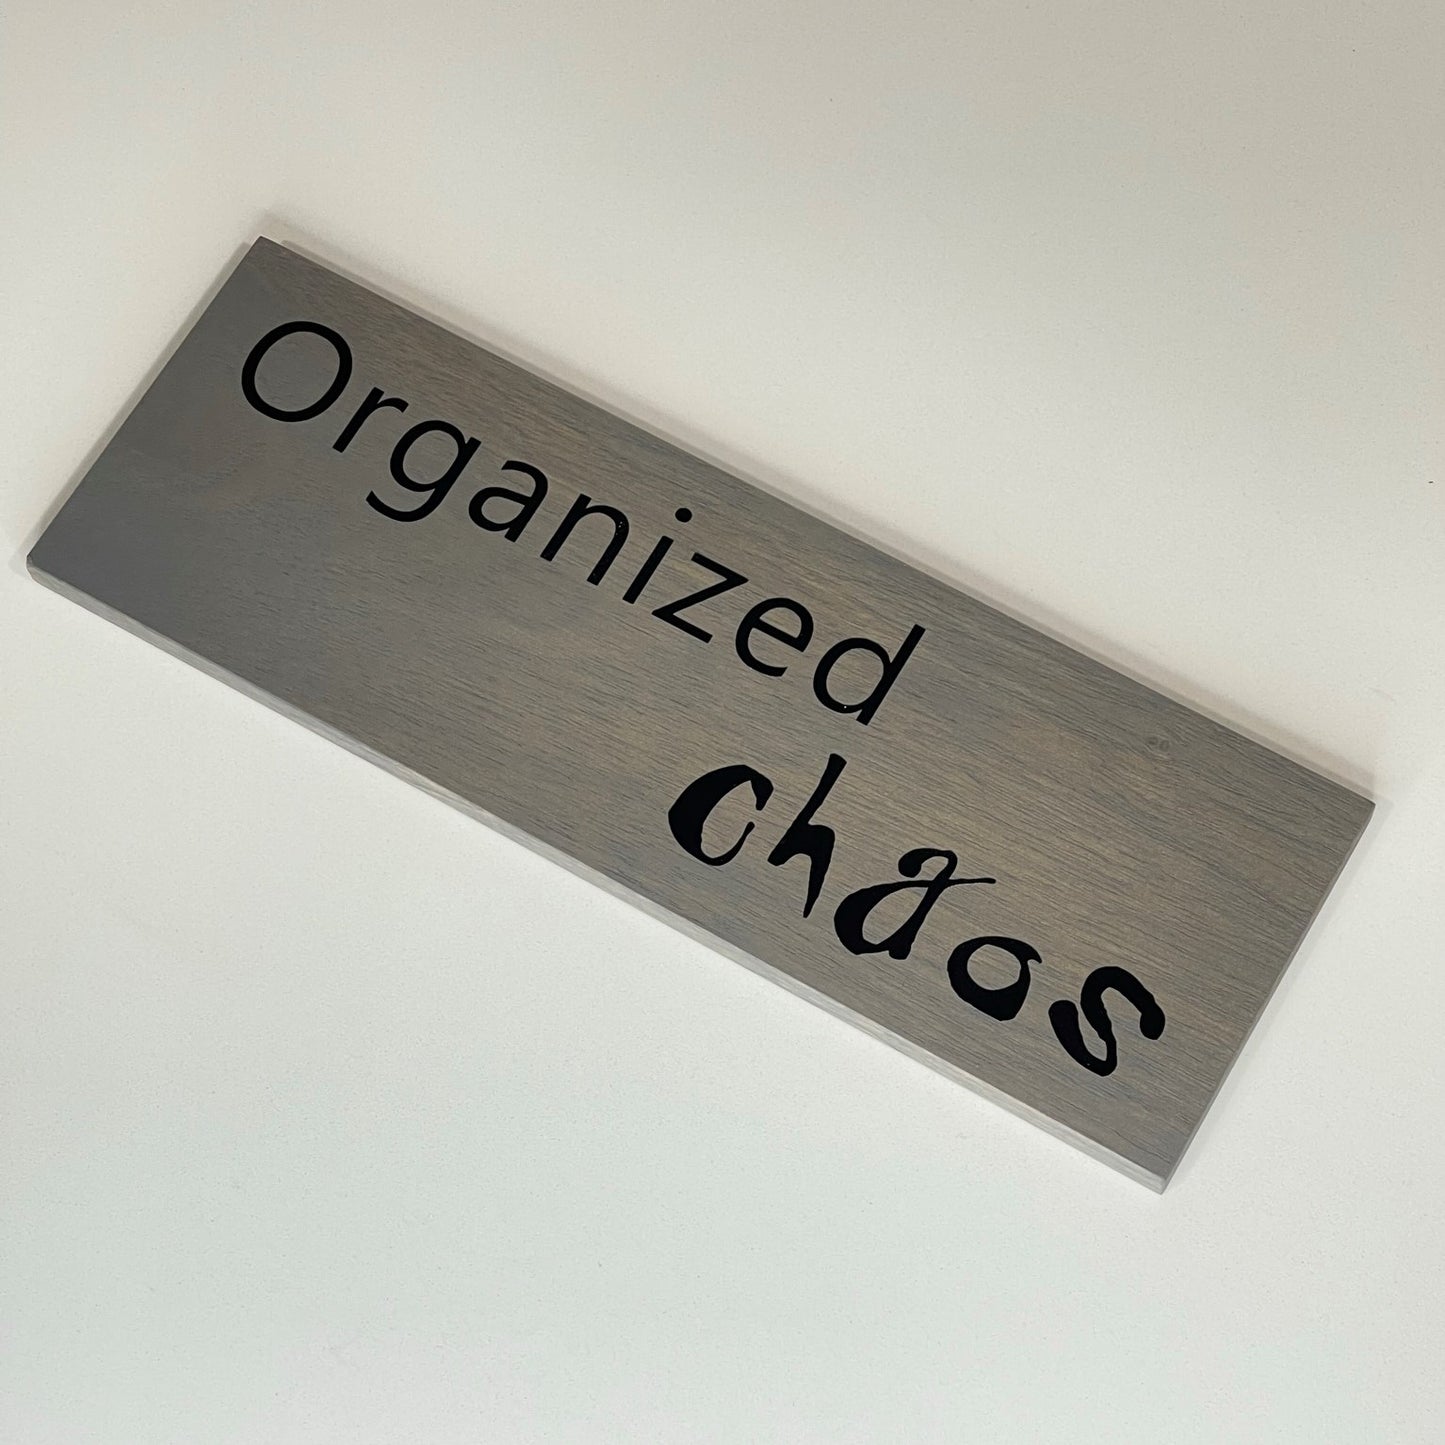 Organized Chaos - Funny Sign - Wall Decor - Office Wall Art - Wooden Sign